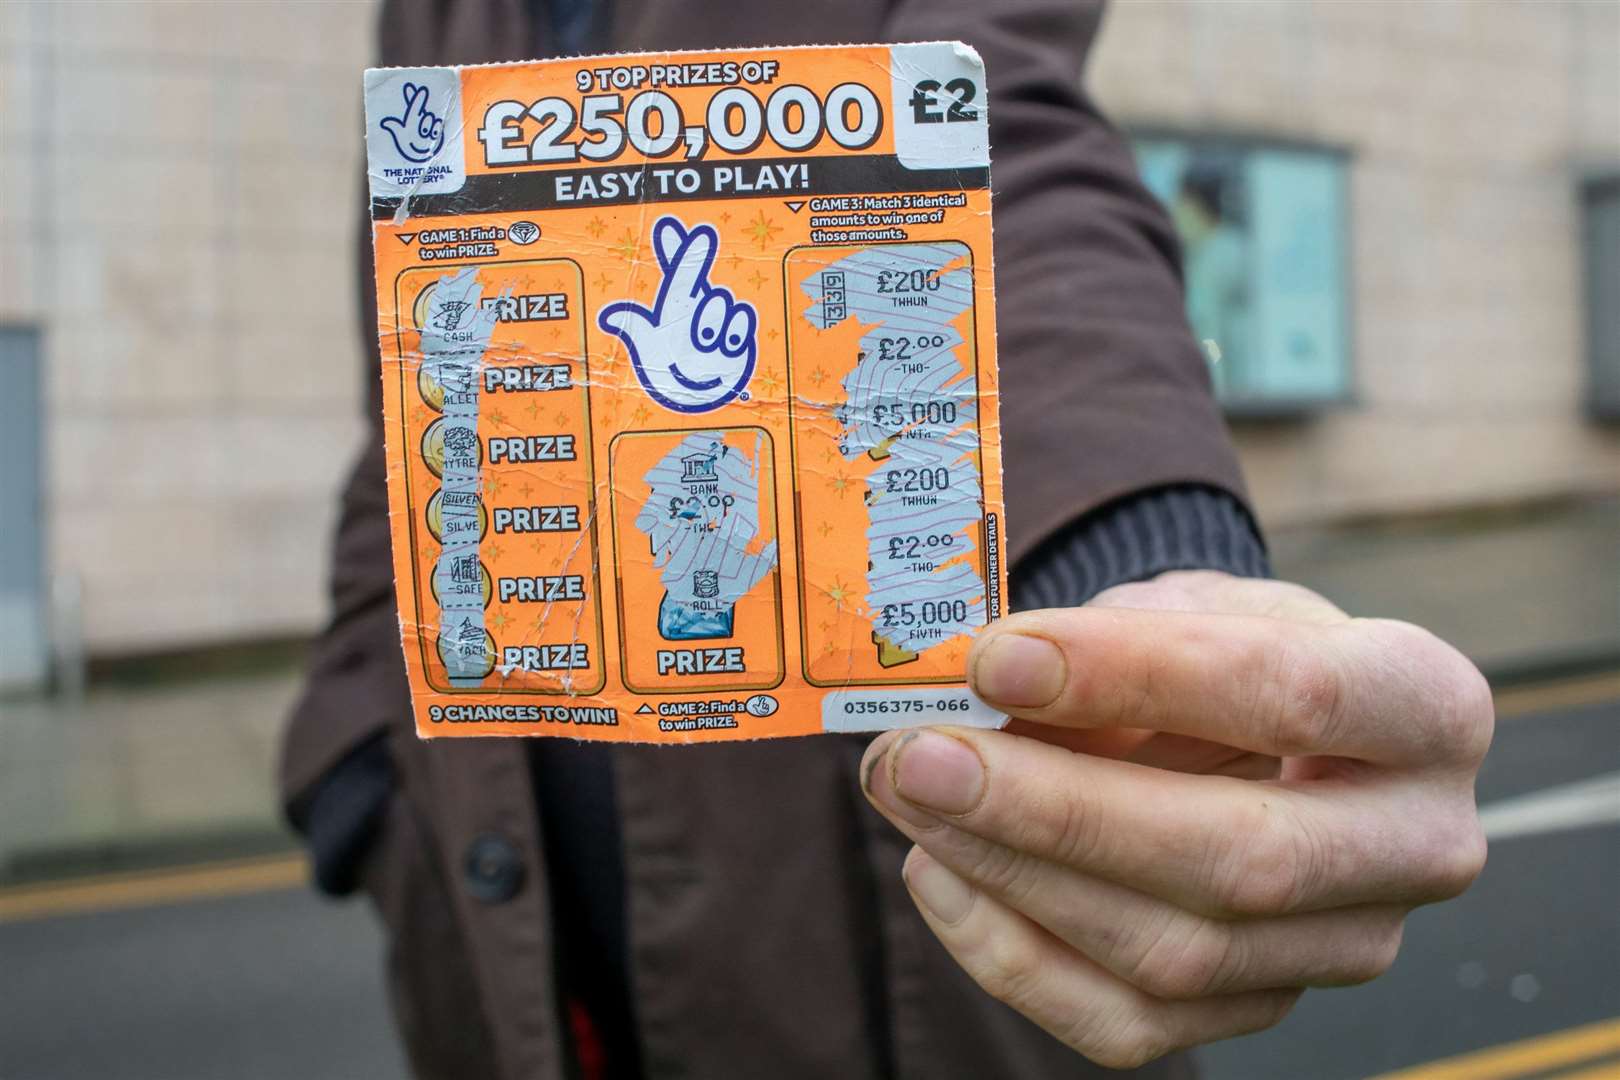 The scratch card Ronnie was able to purchase at Adsa in Folkestone. Picture: SWNS